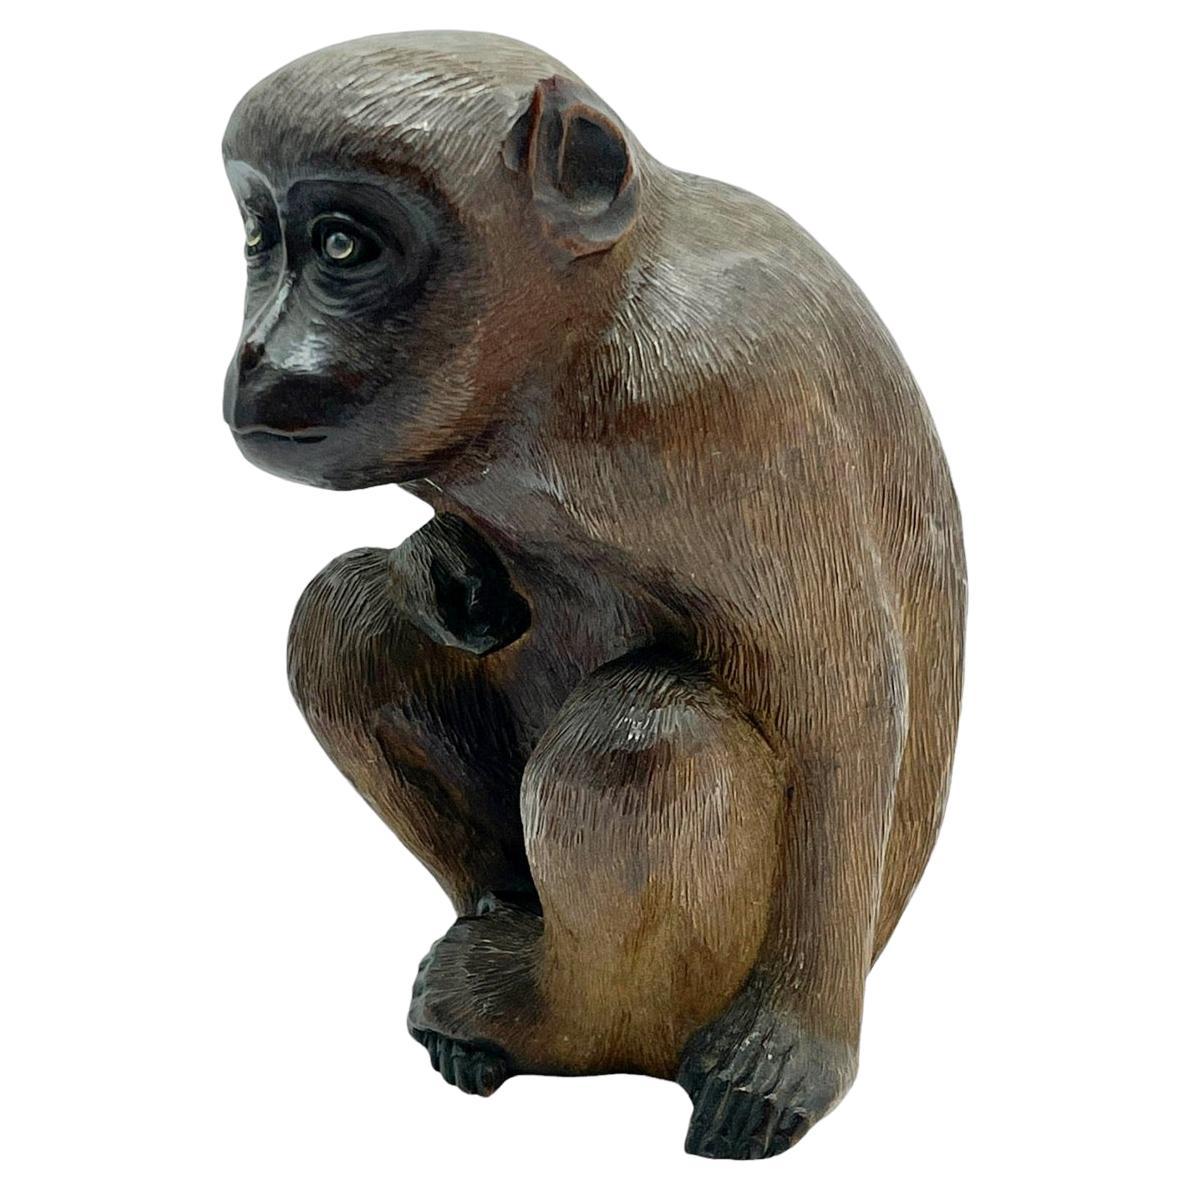 19th Century 'Meiji Period' Japanese Carved Wood Seated Monkey Sculpture